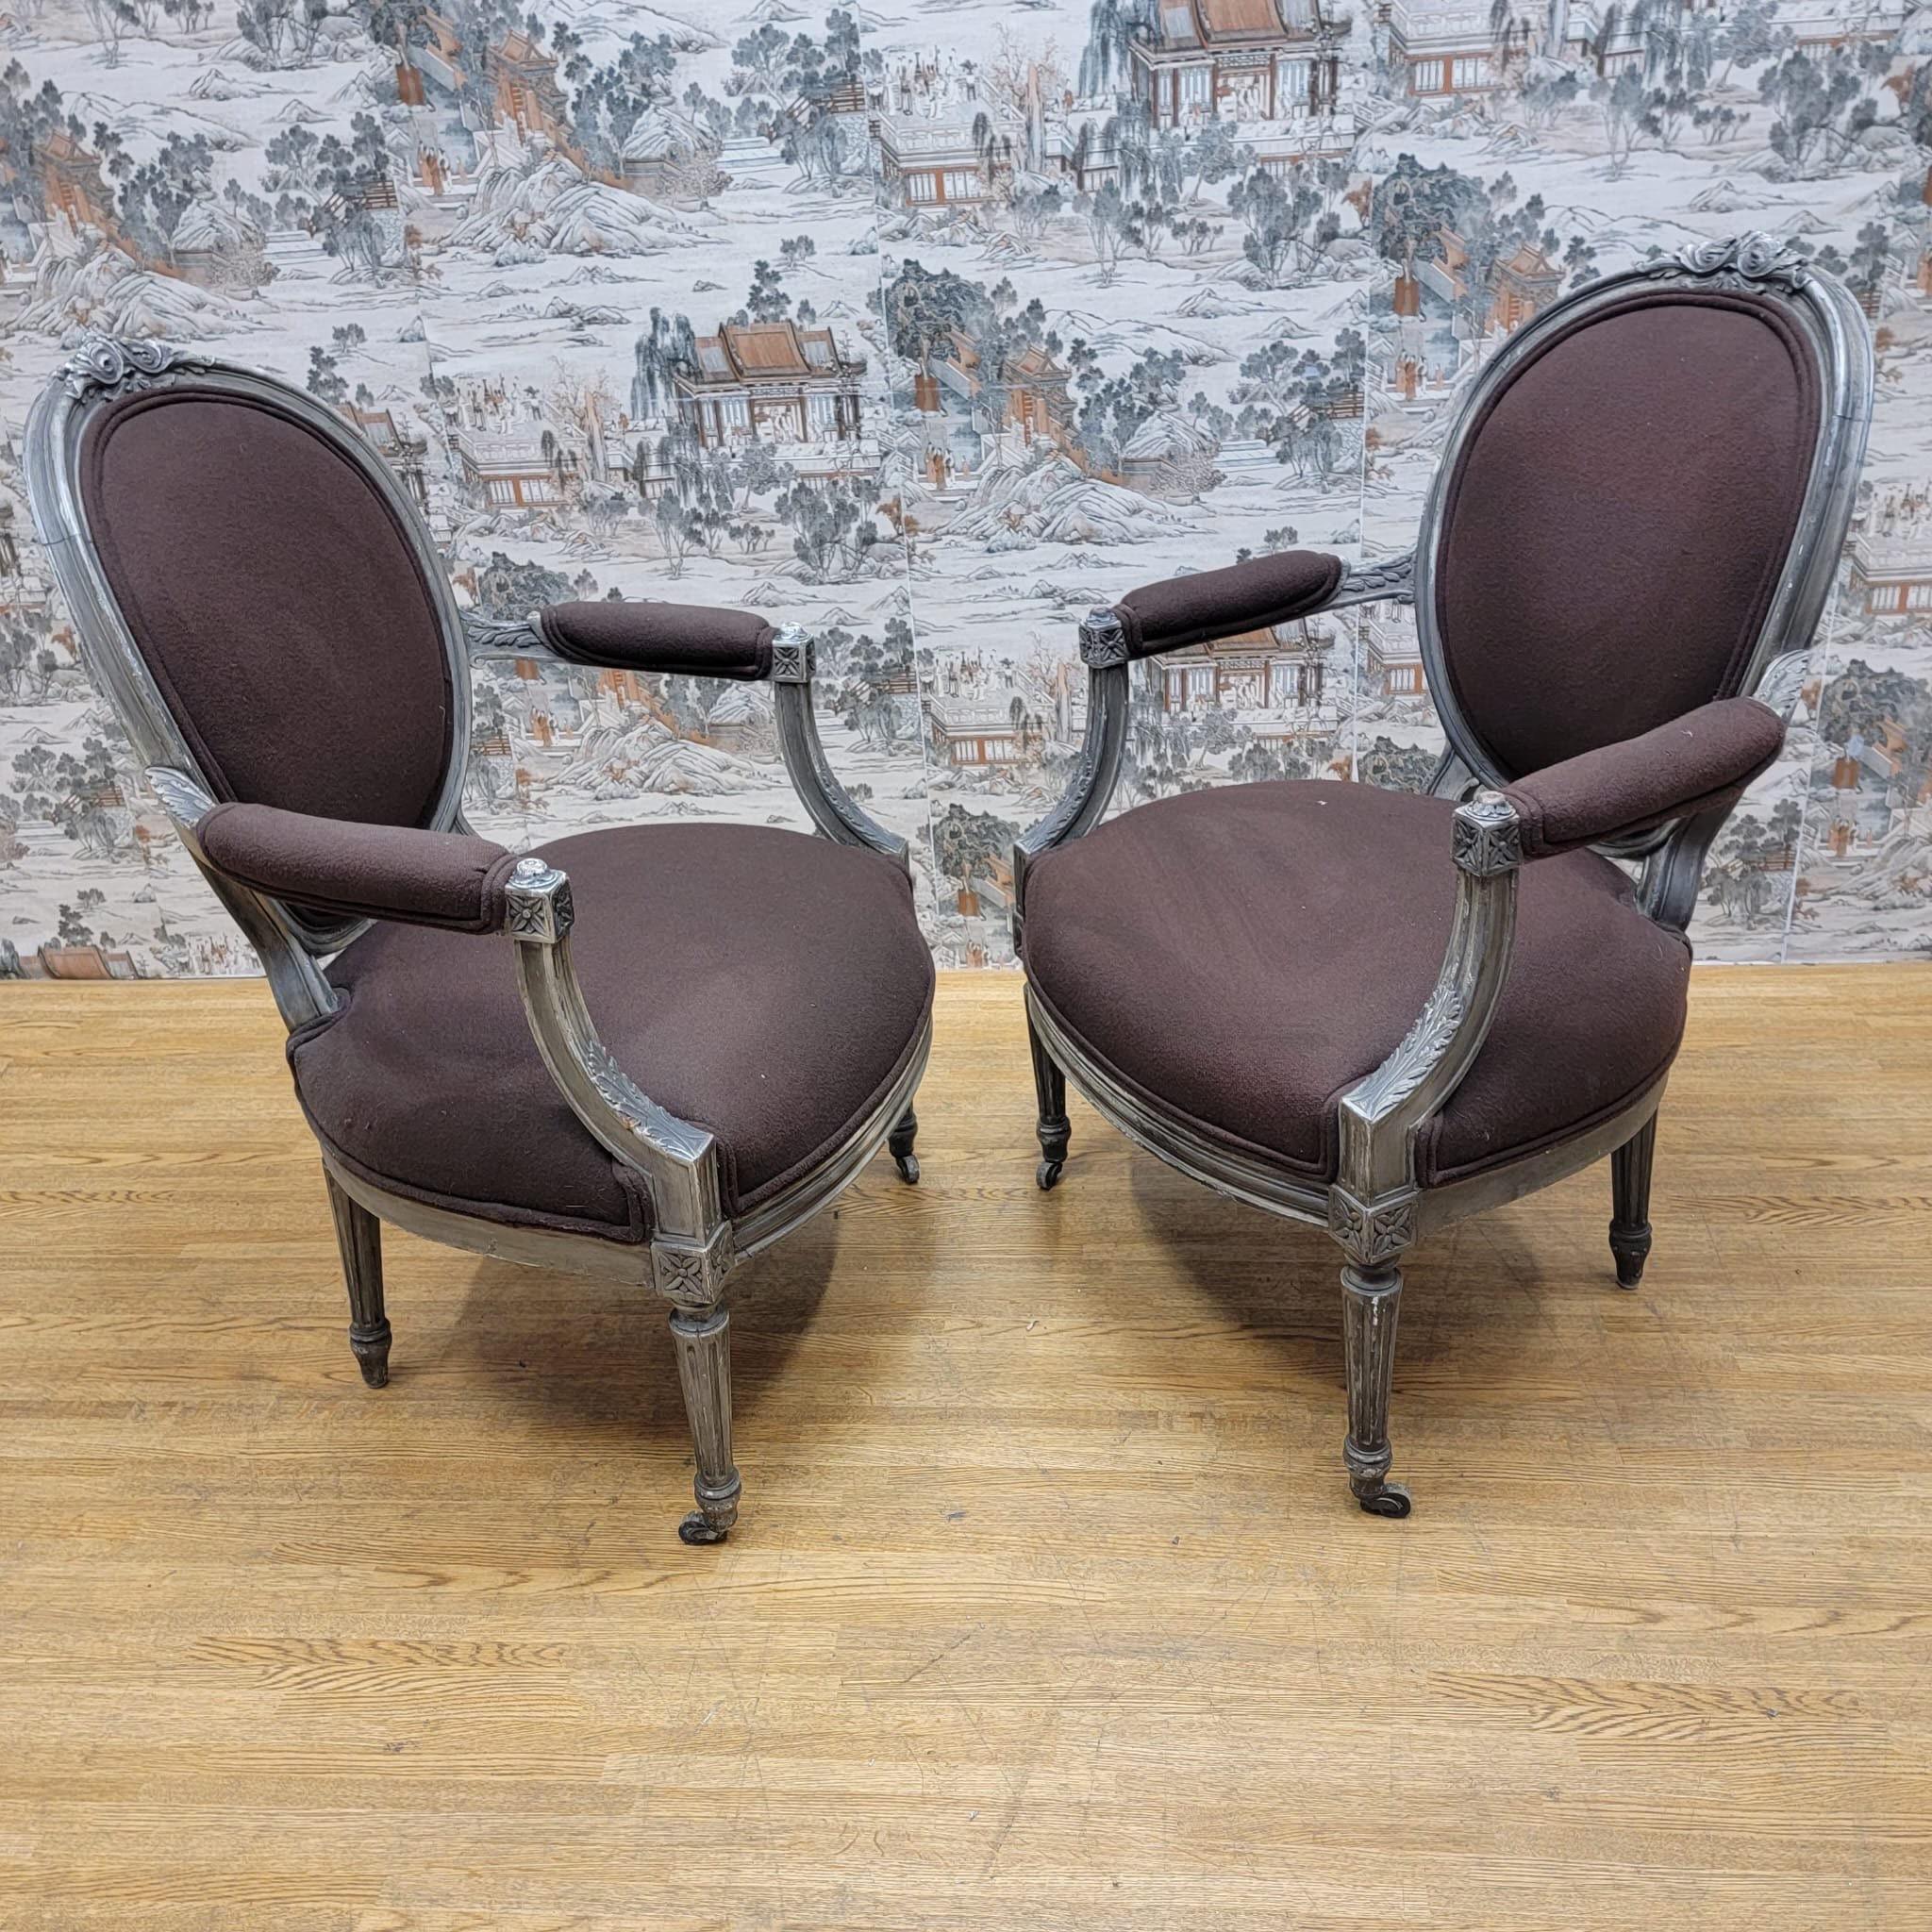 Fabric Antique French Louis XVI Hand Carved Silver Gilt Framed Fauteuil Armchairs-Pair For Sale